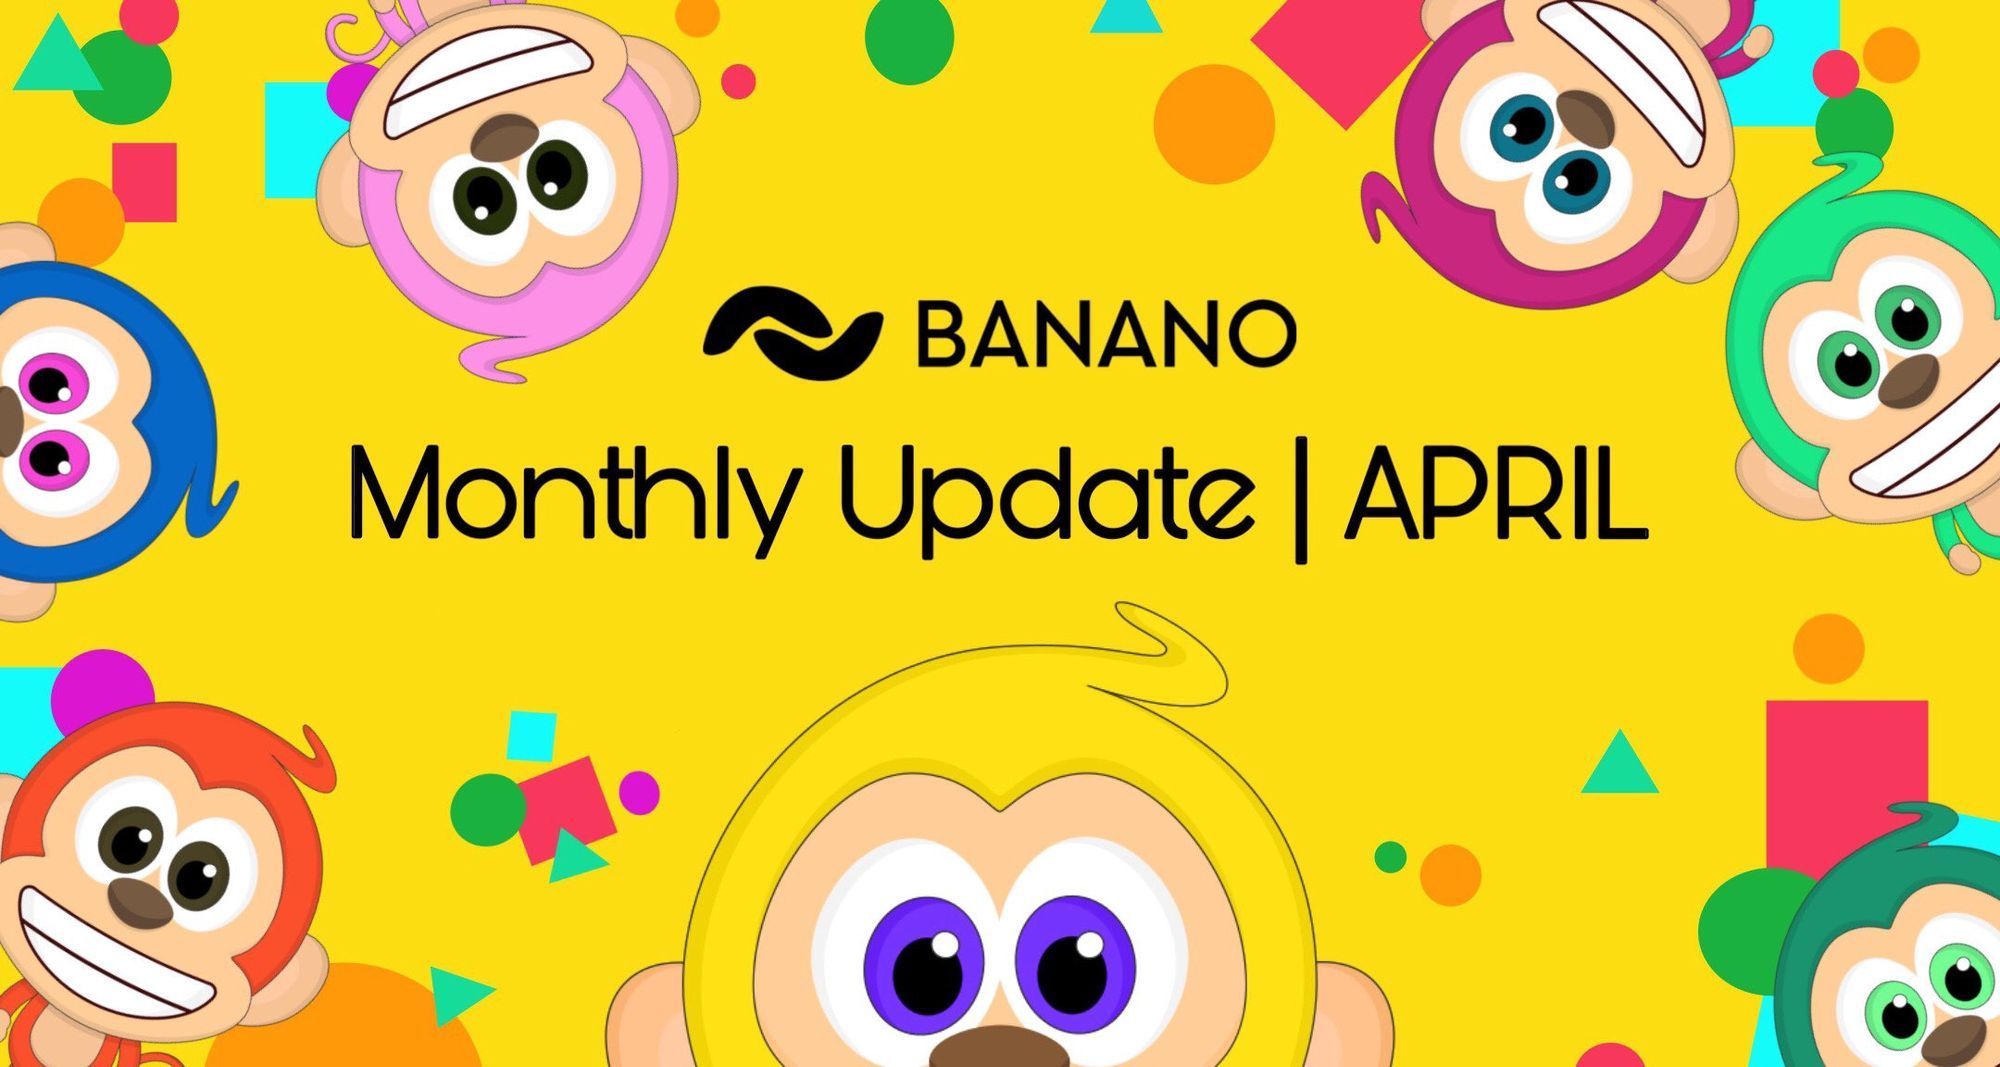 BANANO Monthly Update #24 (April 2020)